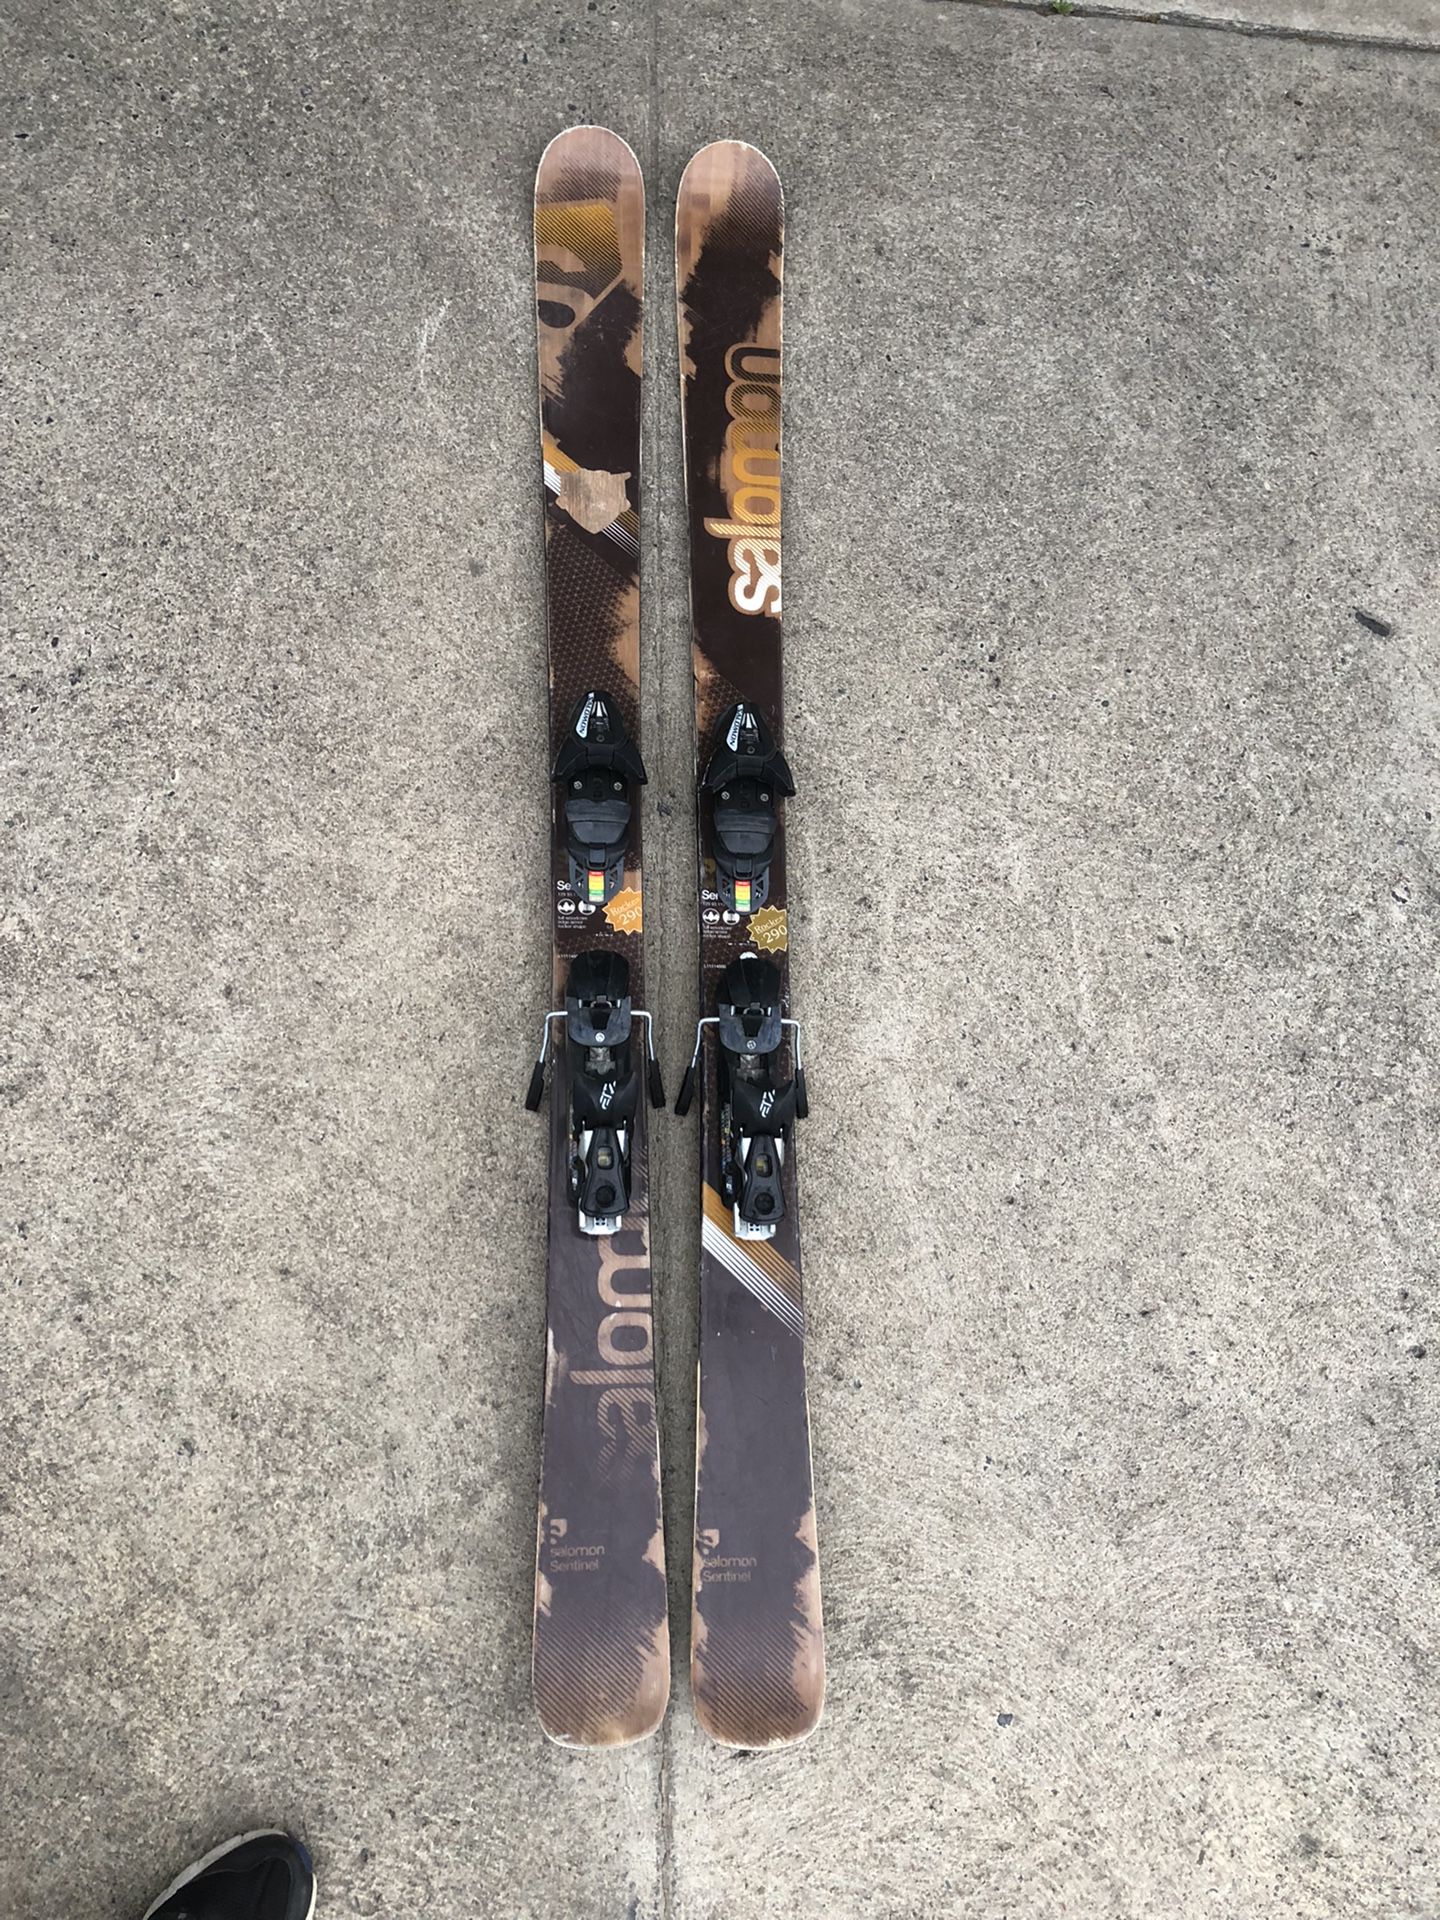 Best Powder All Mountain Skis Ever Made Full Wood Core- Rockers Auto Turn Fully Adjustable Salomon Bindings Guaranteed Most Fun You Will Ever Have 